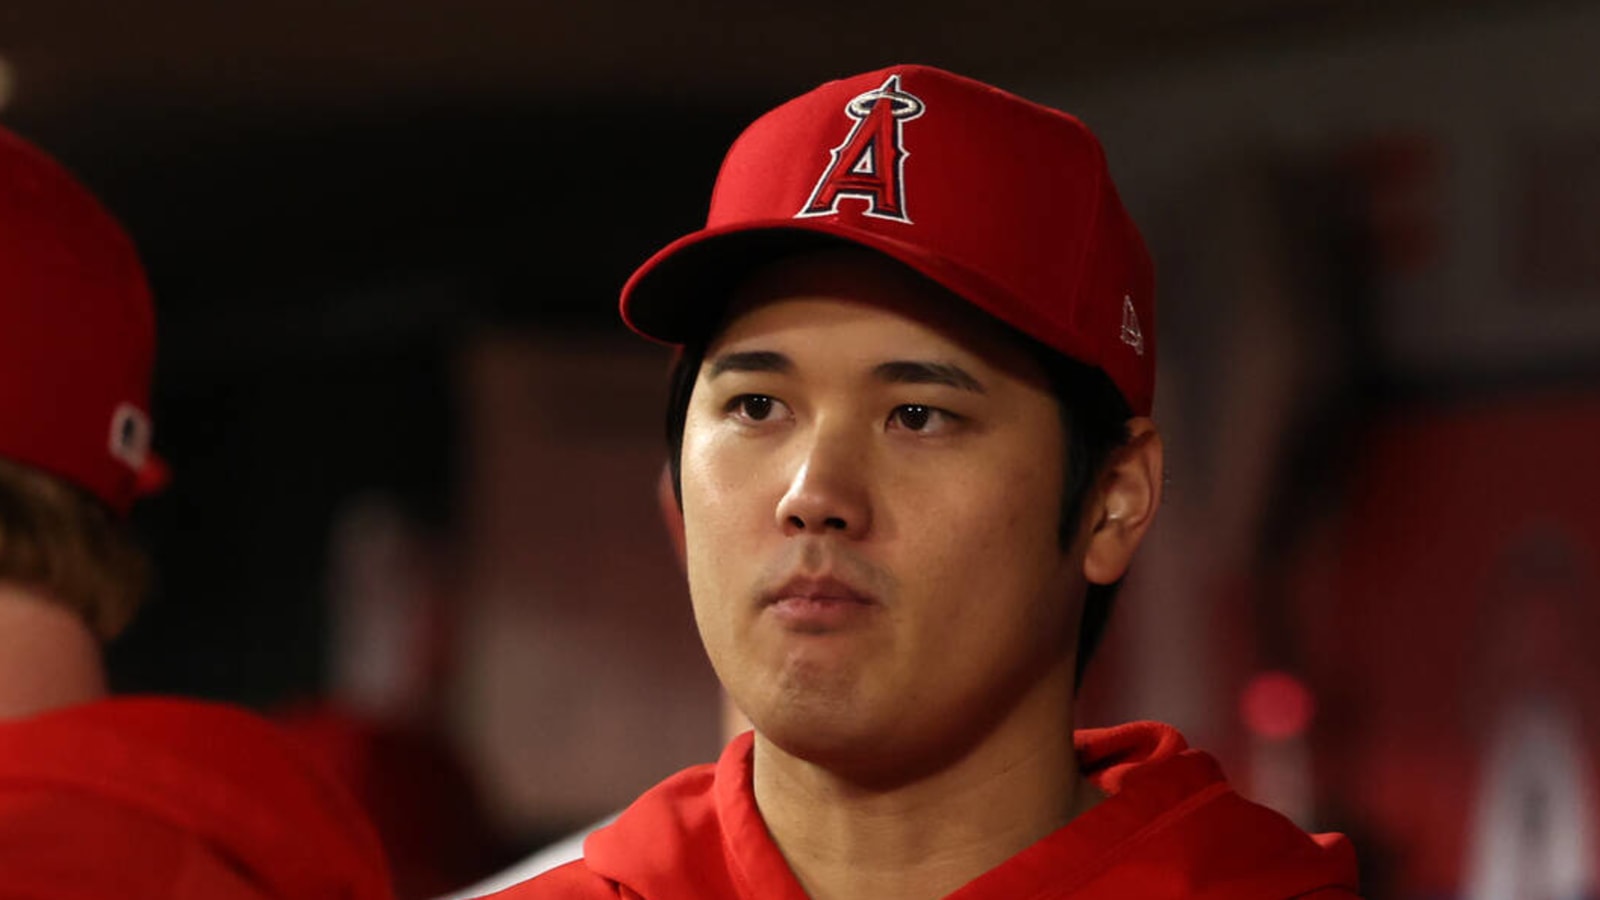 Ohtani shares message after elbow surgery